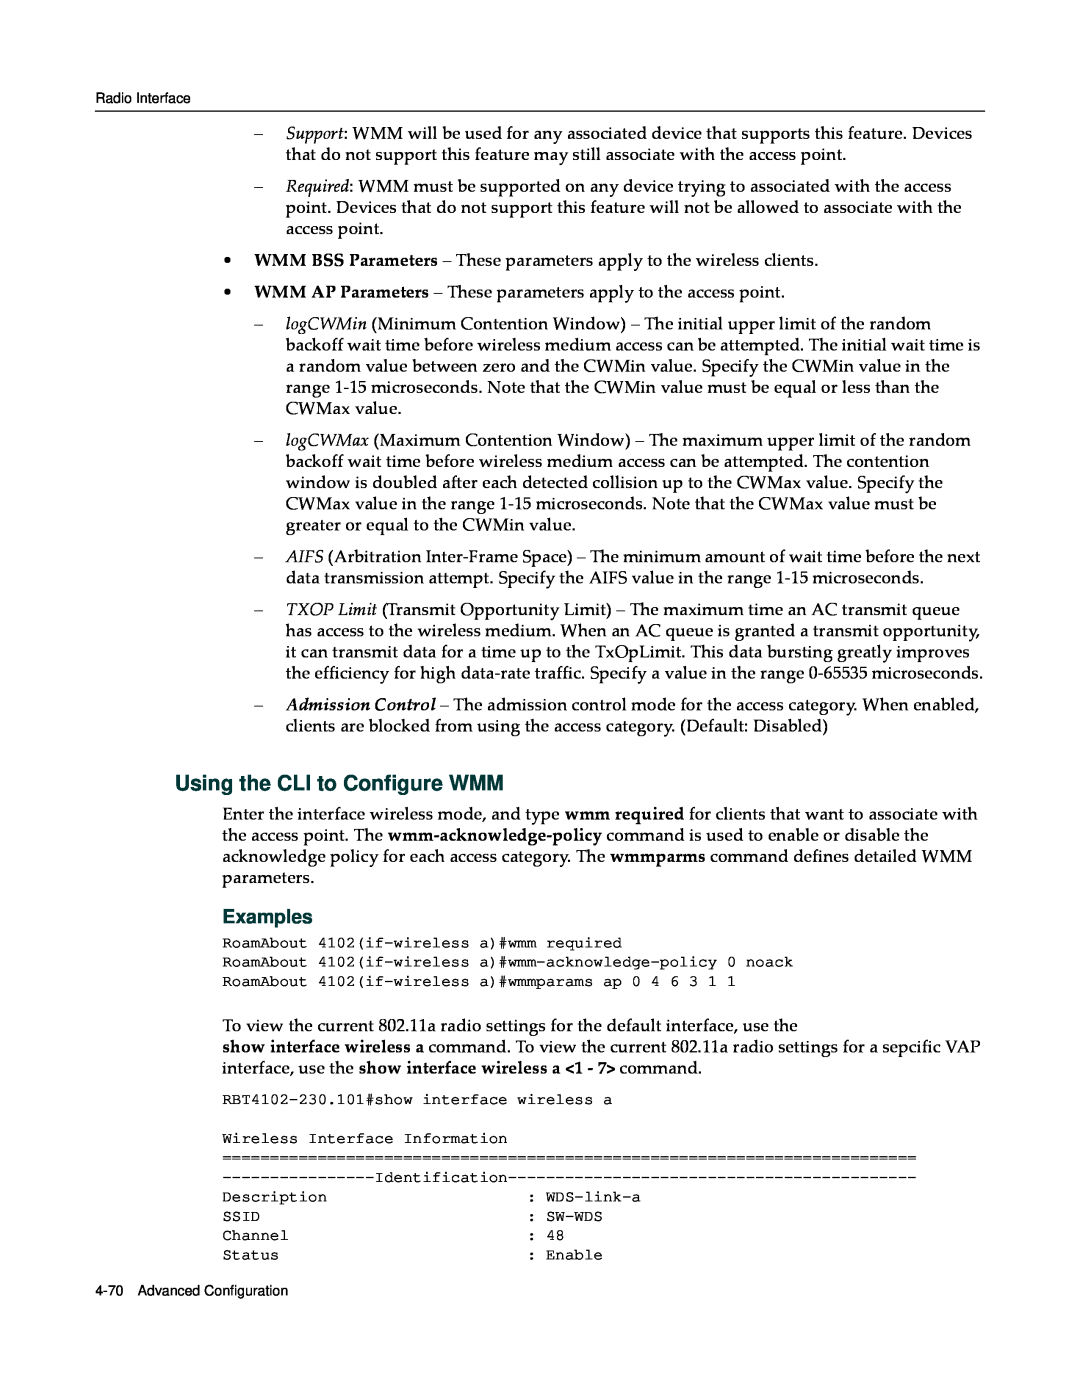 Enterasys Networks RBT-4102 manual Using the CLI to Configure WMM, Examples 